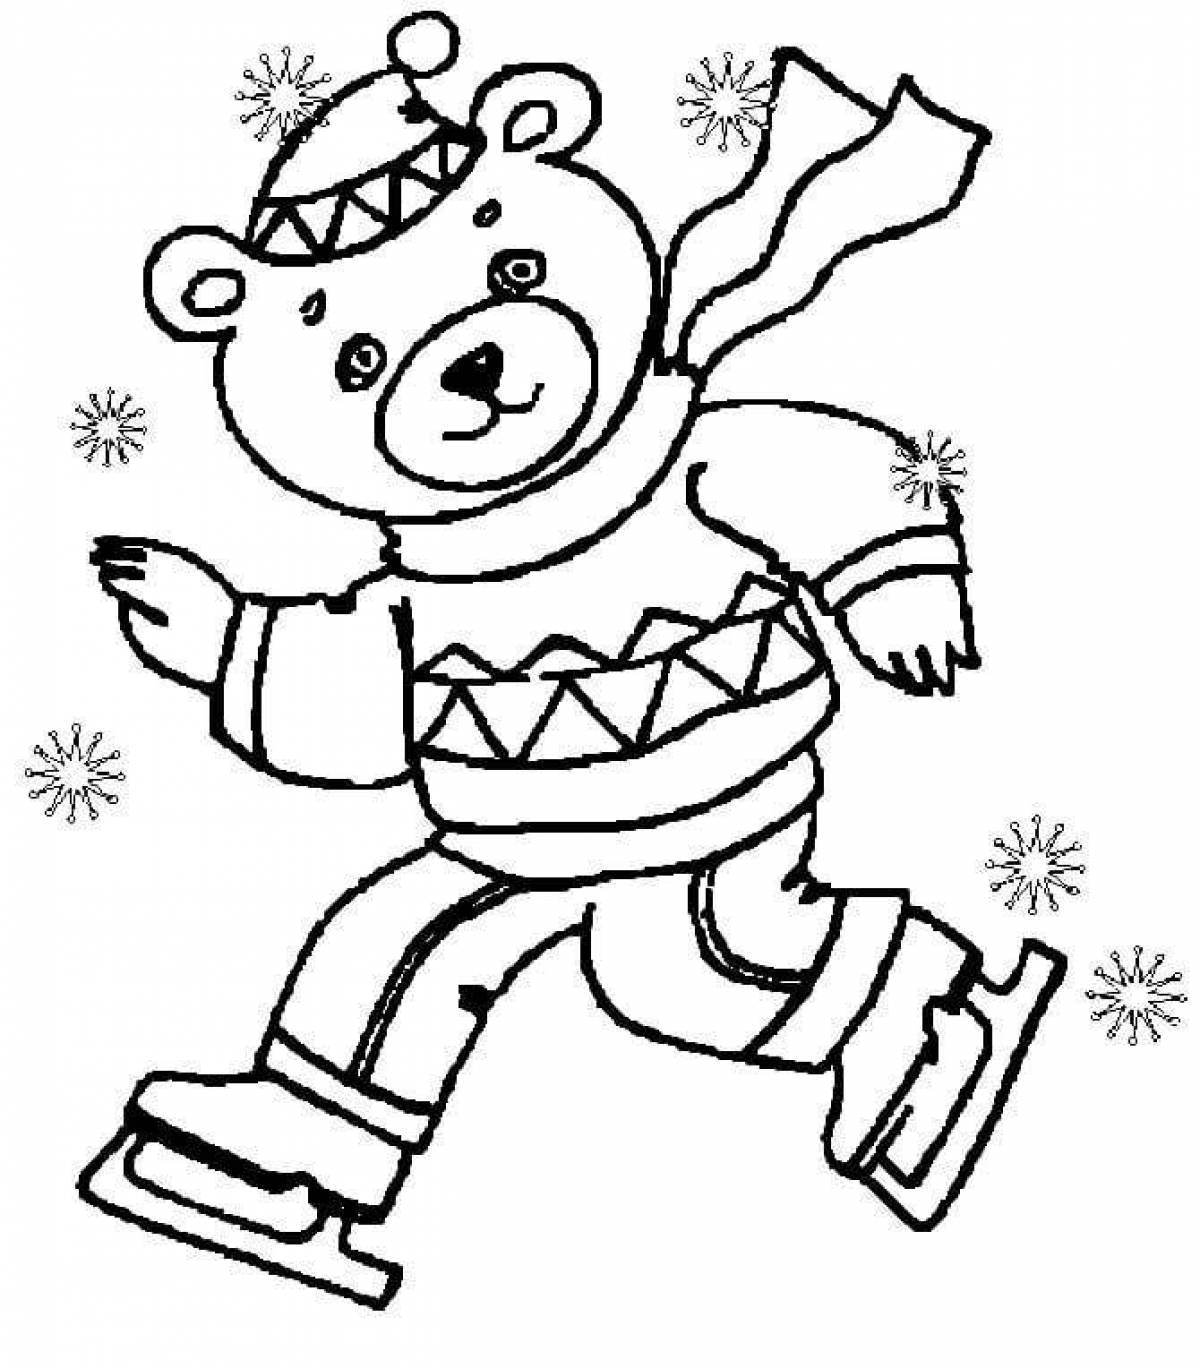 Brilliant coloring page 3 4 years of winter